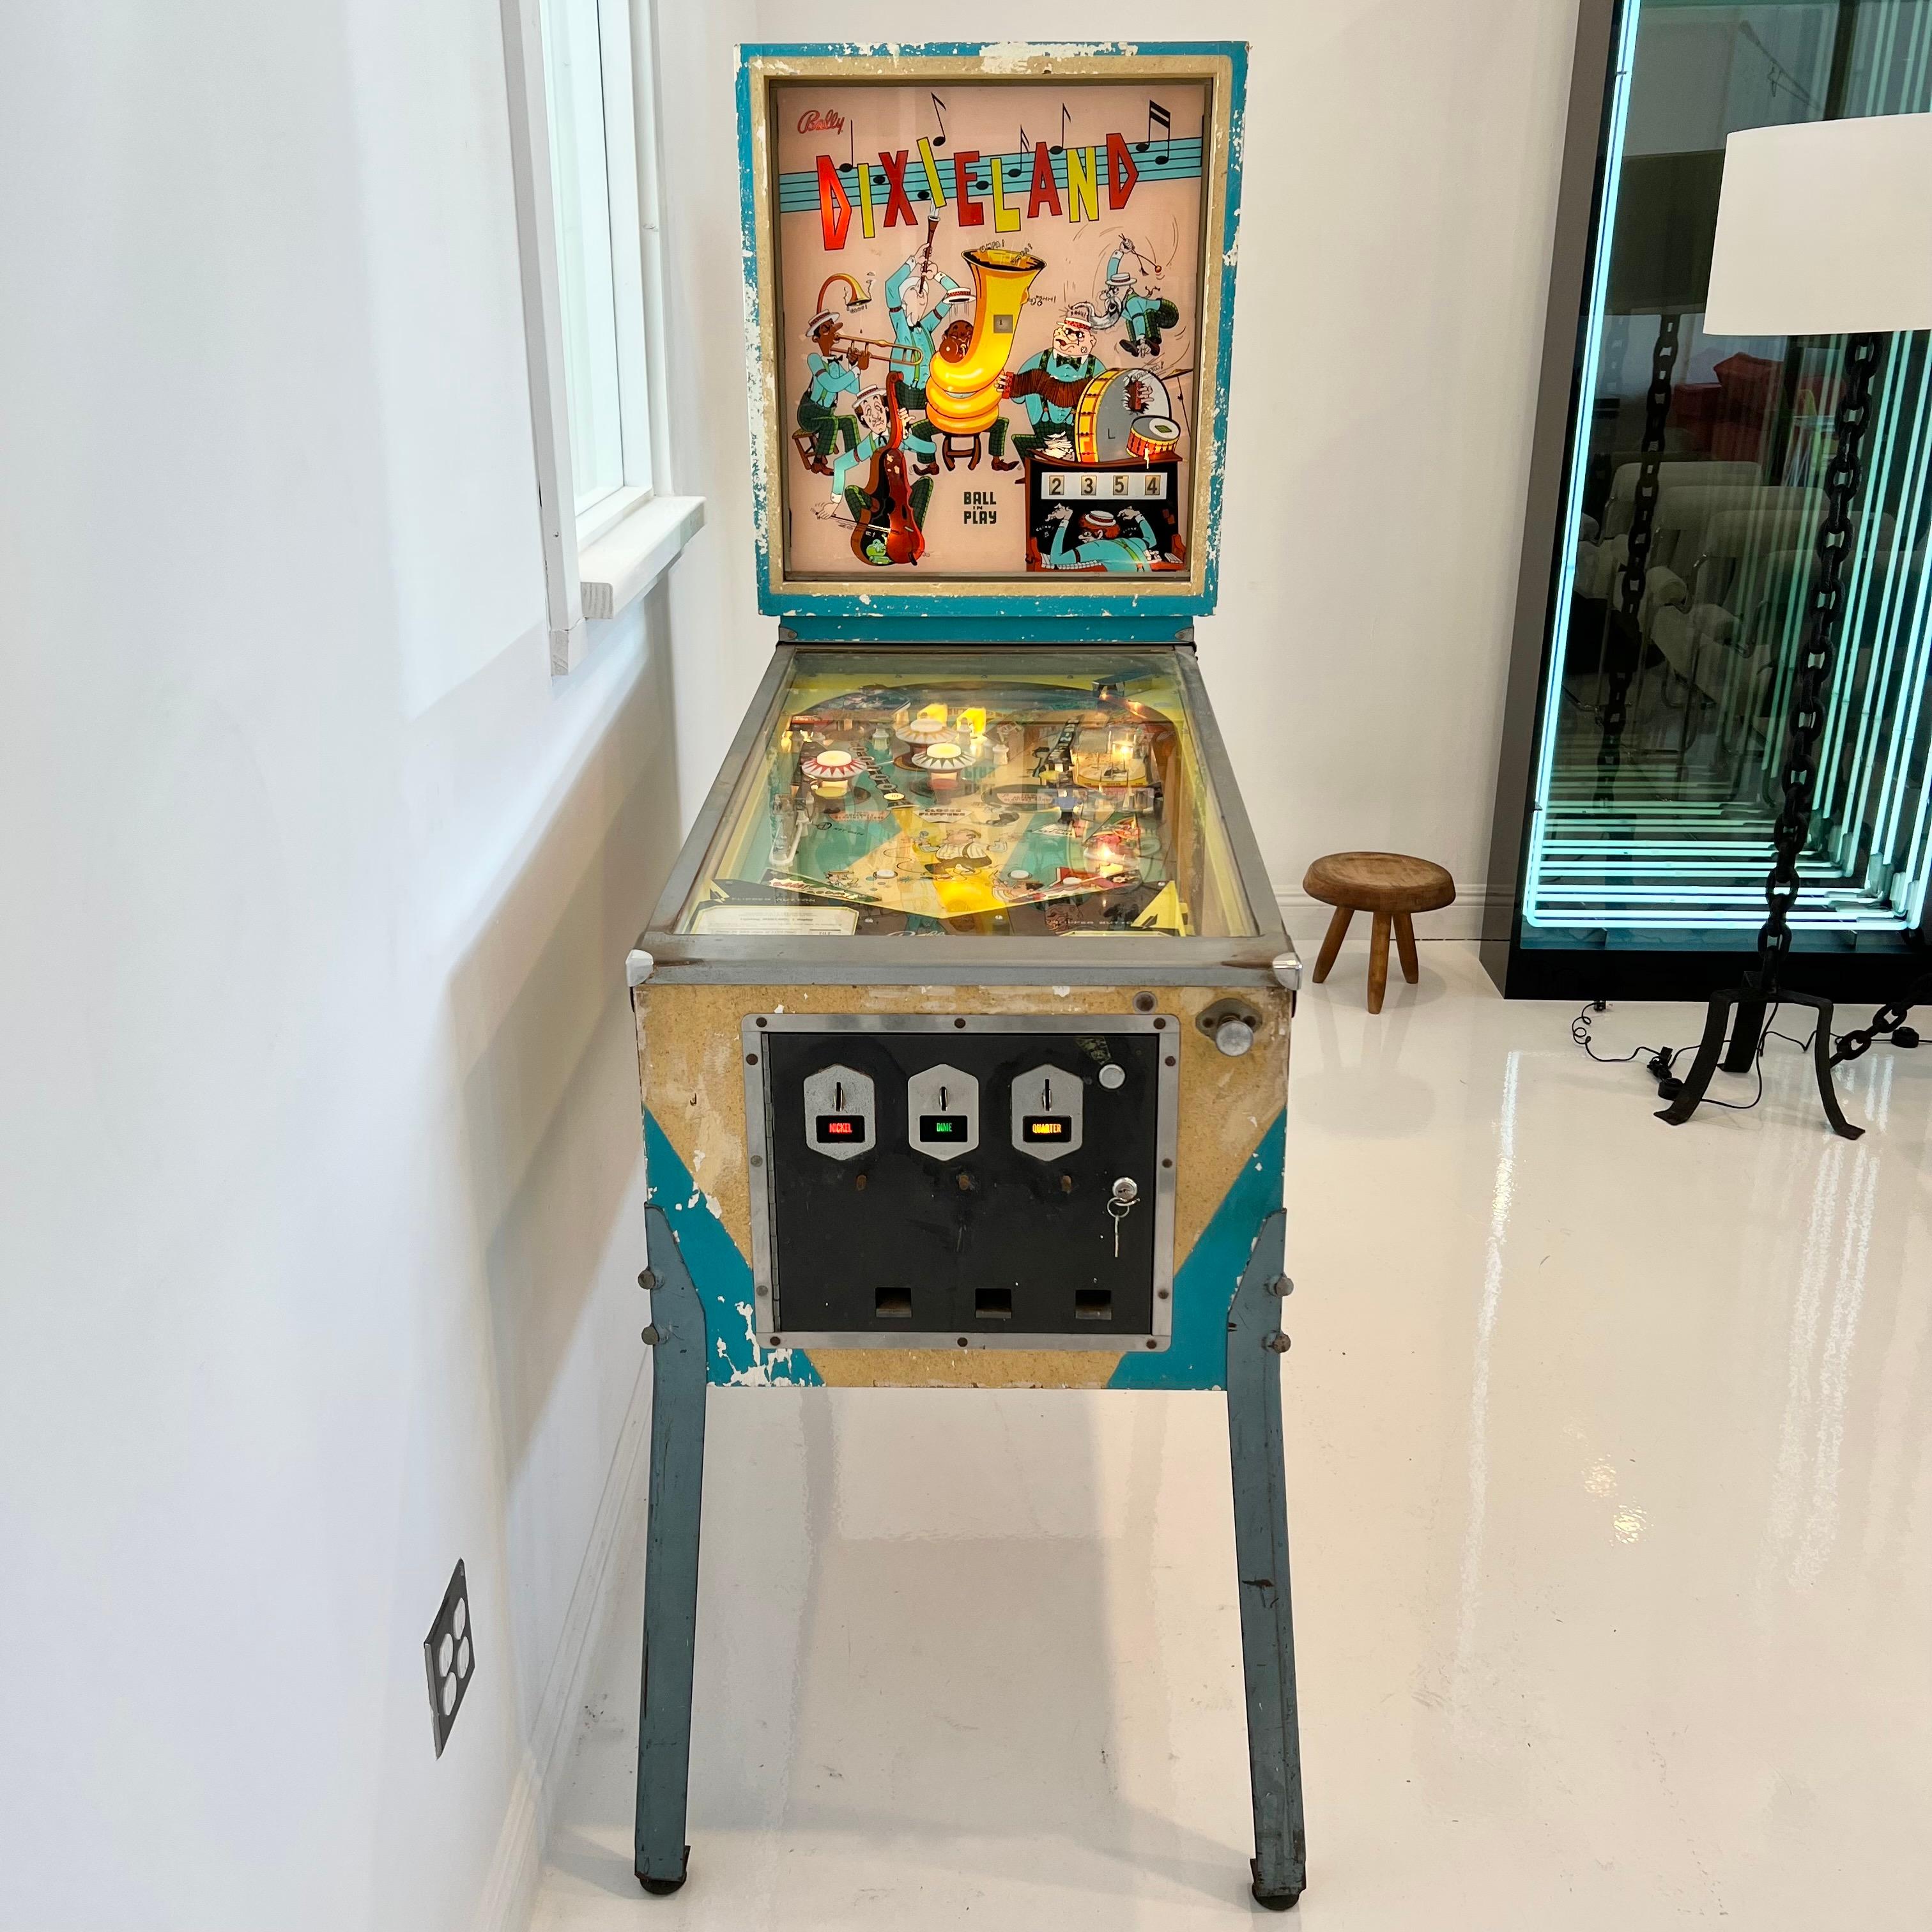 Vintage 'DIXIELAND' themed pinball machine from 1968. Made by Bally's. In excellent working condition. Great visuals and sounds. Fun paced gameplay. Game has two small flippers, which are usually less desirable. But this game's flippers pivot and